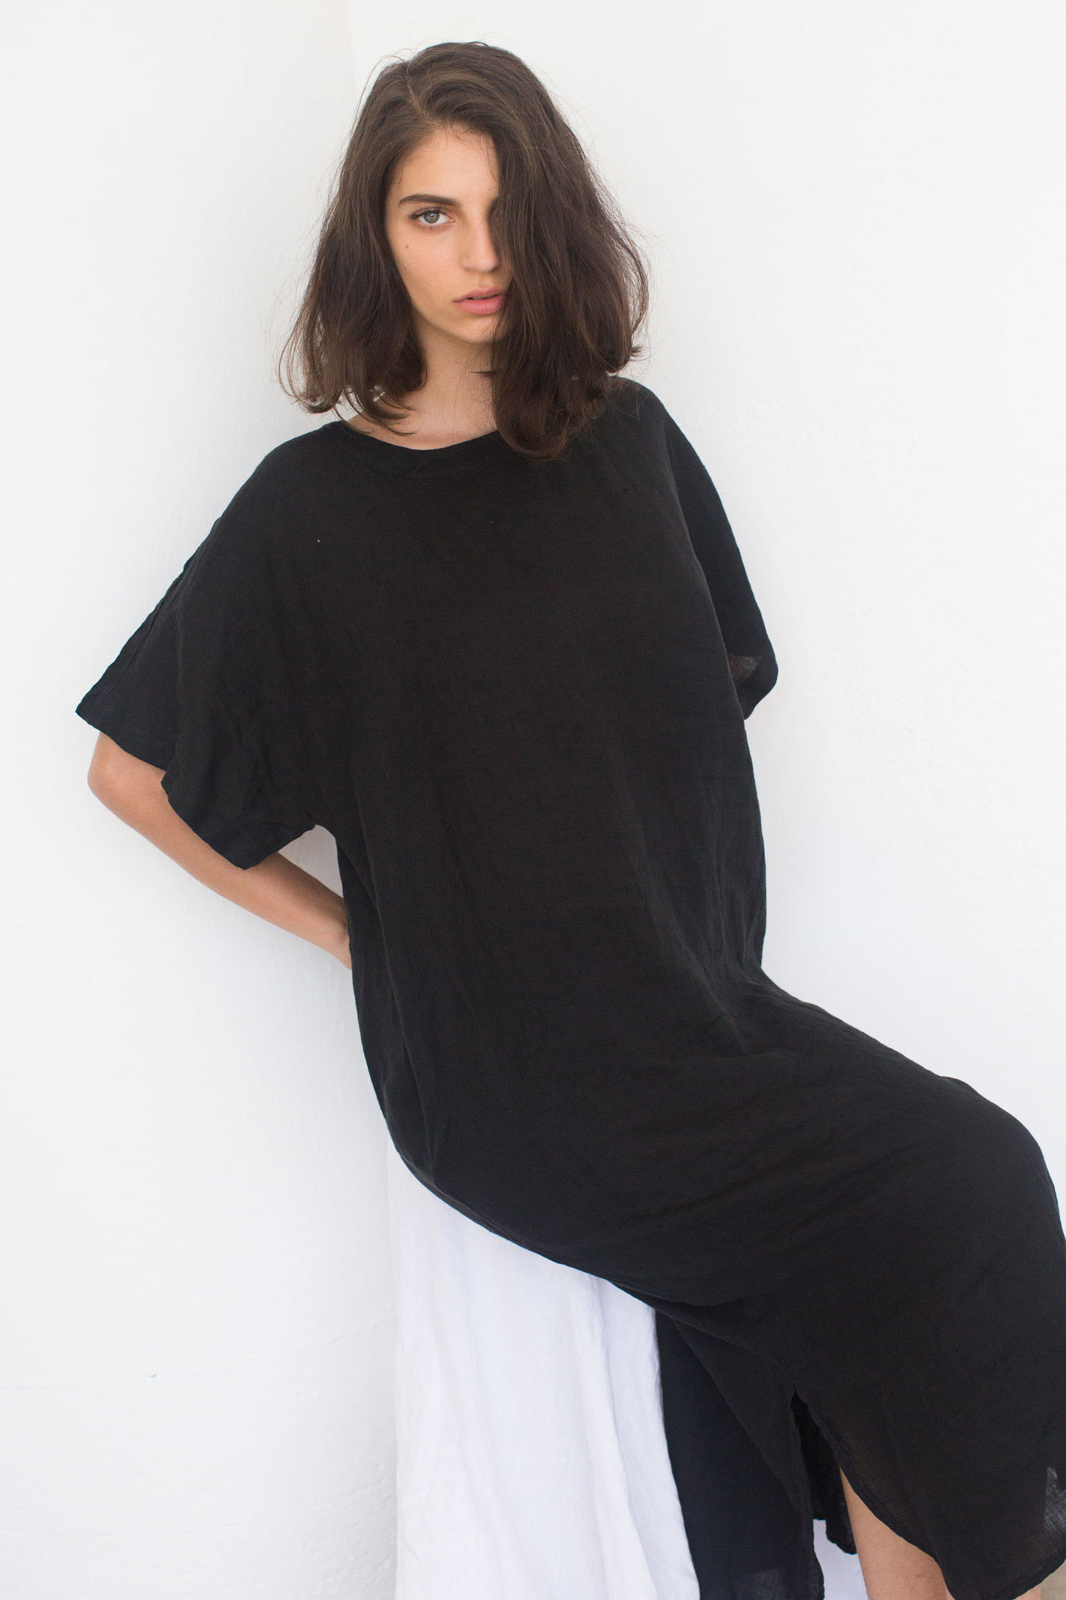 Black Crane – Clothing made in LA, inspired by Japanese culture